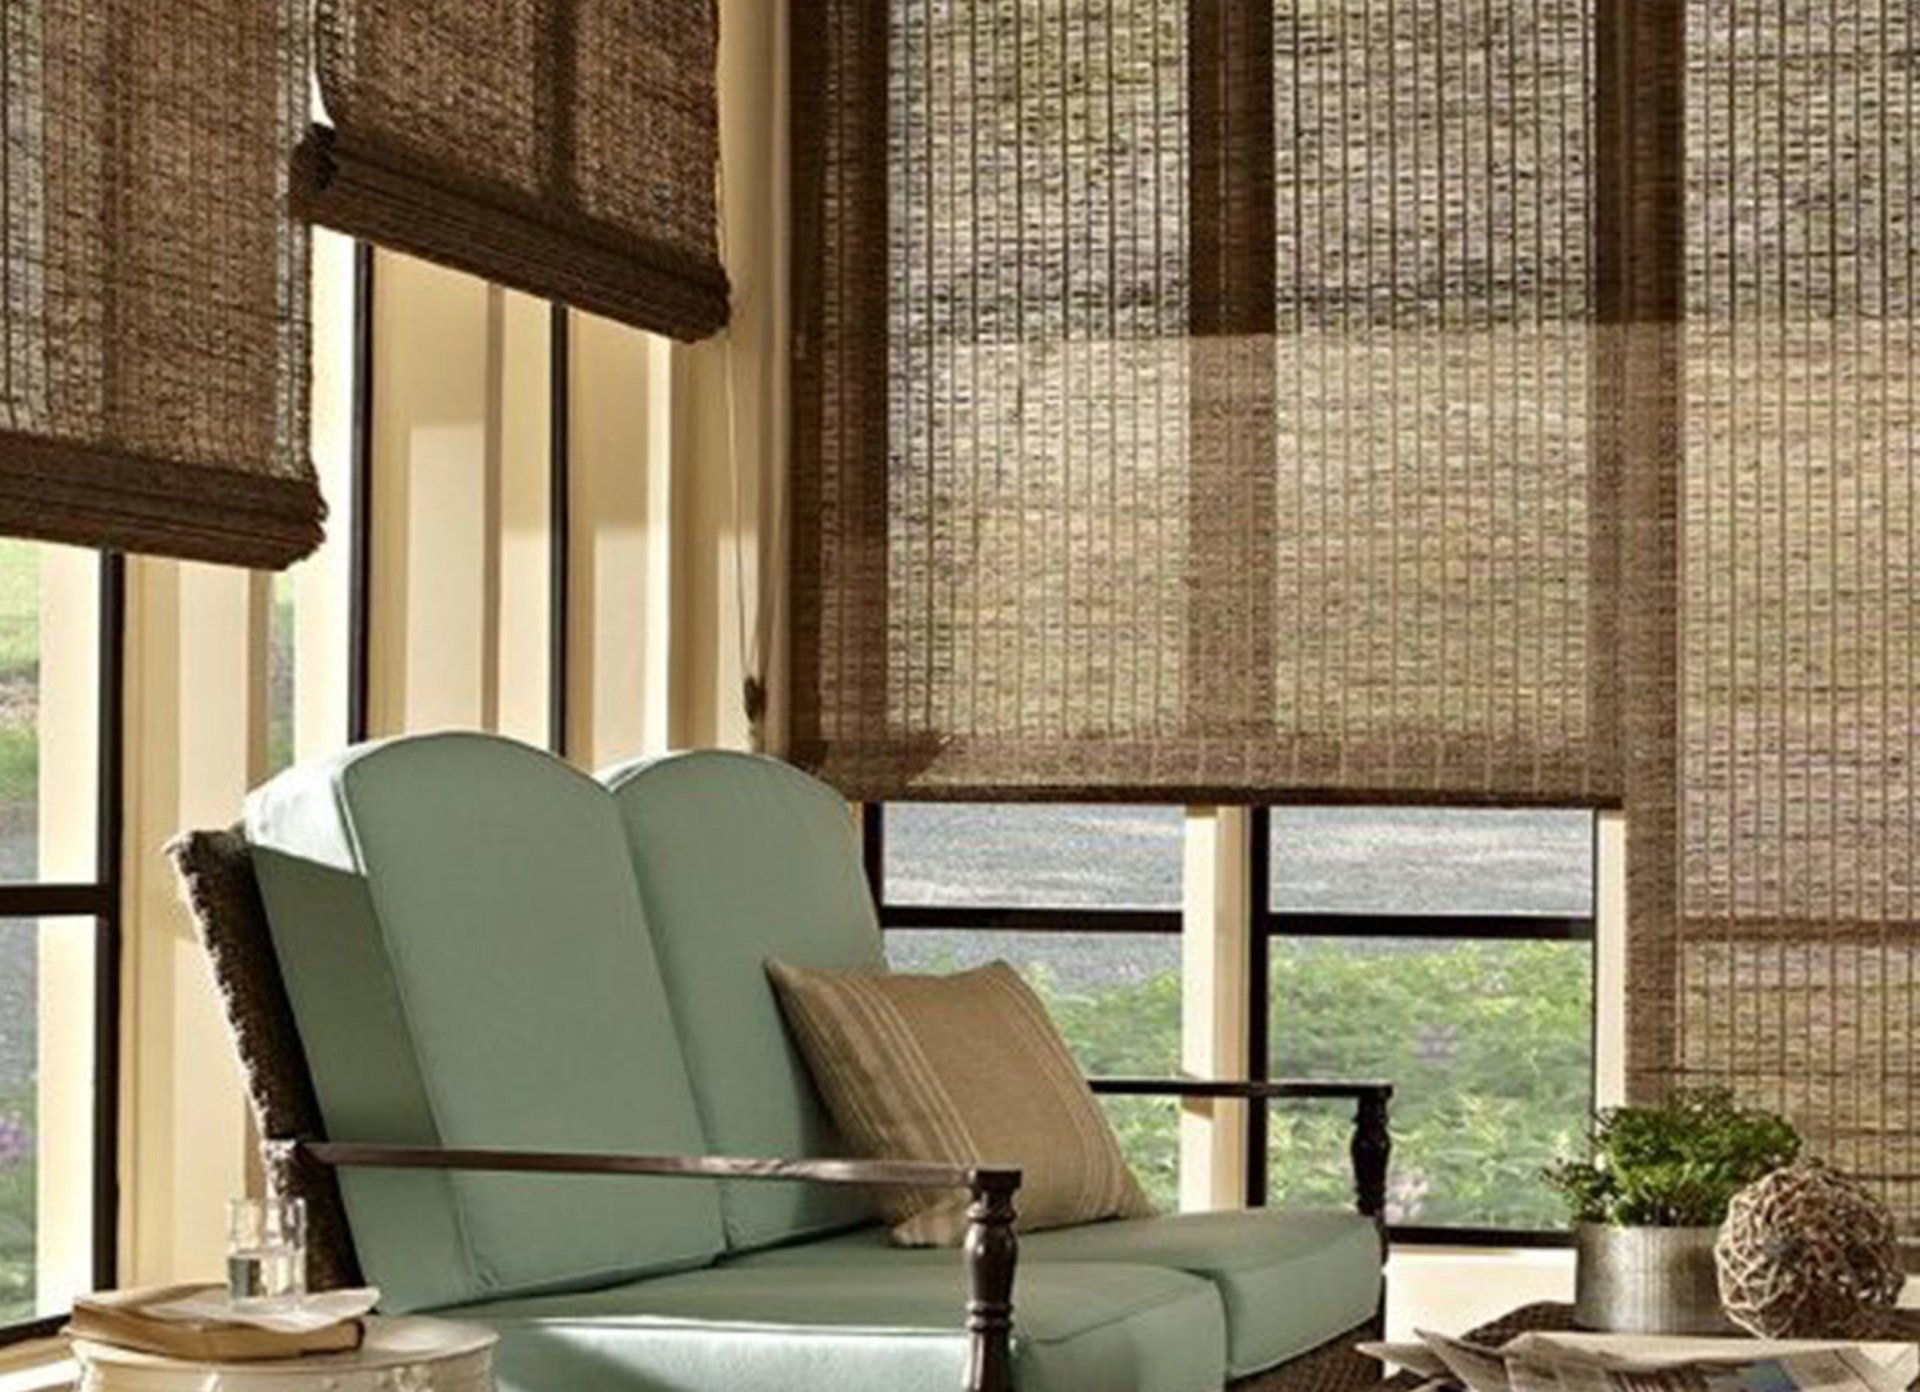 Brown Woven Shade design in a living room